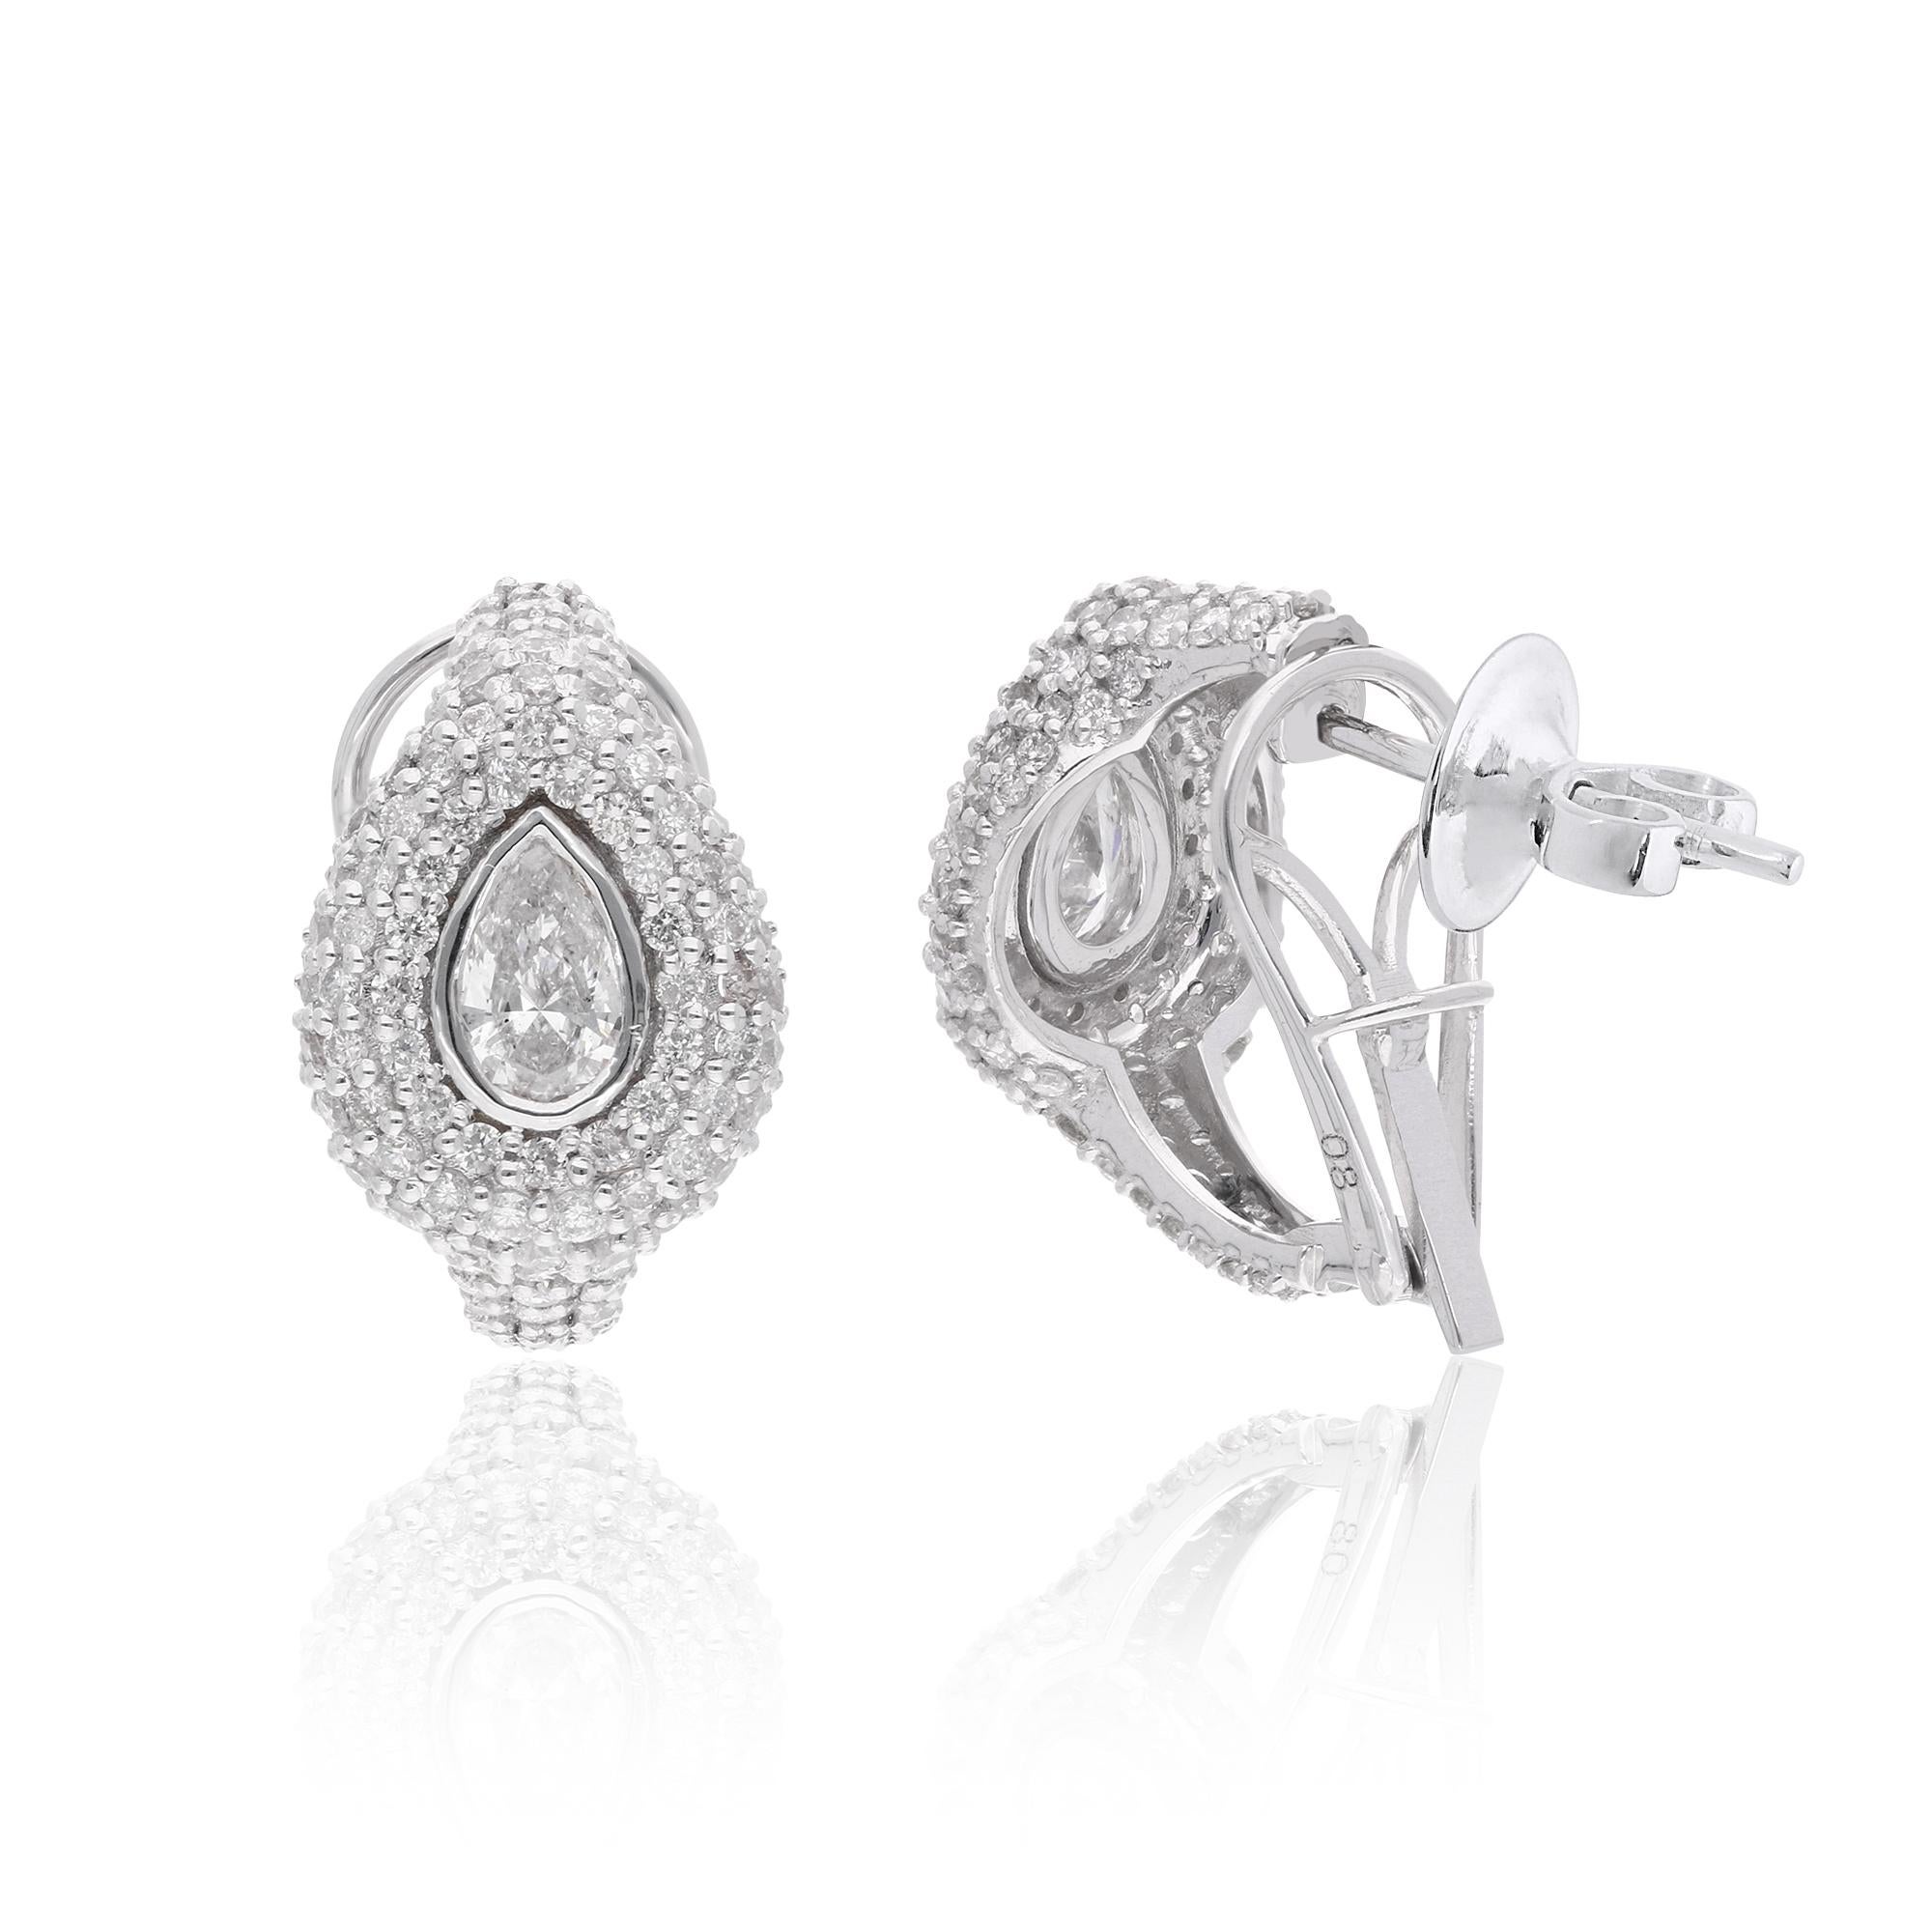 Add vivacity to your glamorous look by wearing this Earringss by Spectrum Jewels. Featuring an ethnic handmade design, this Earrings is embellished with Diamond for a more feminine effect. Wear these 18k White Gold Earrings with your best casual